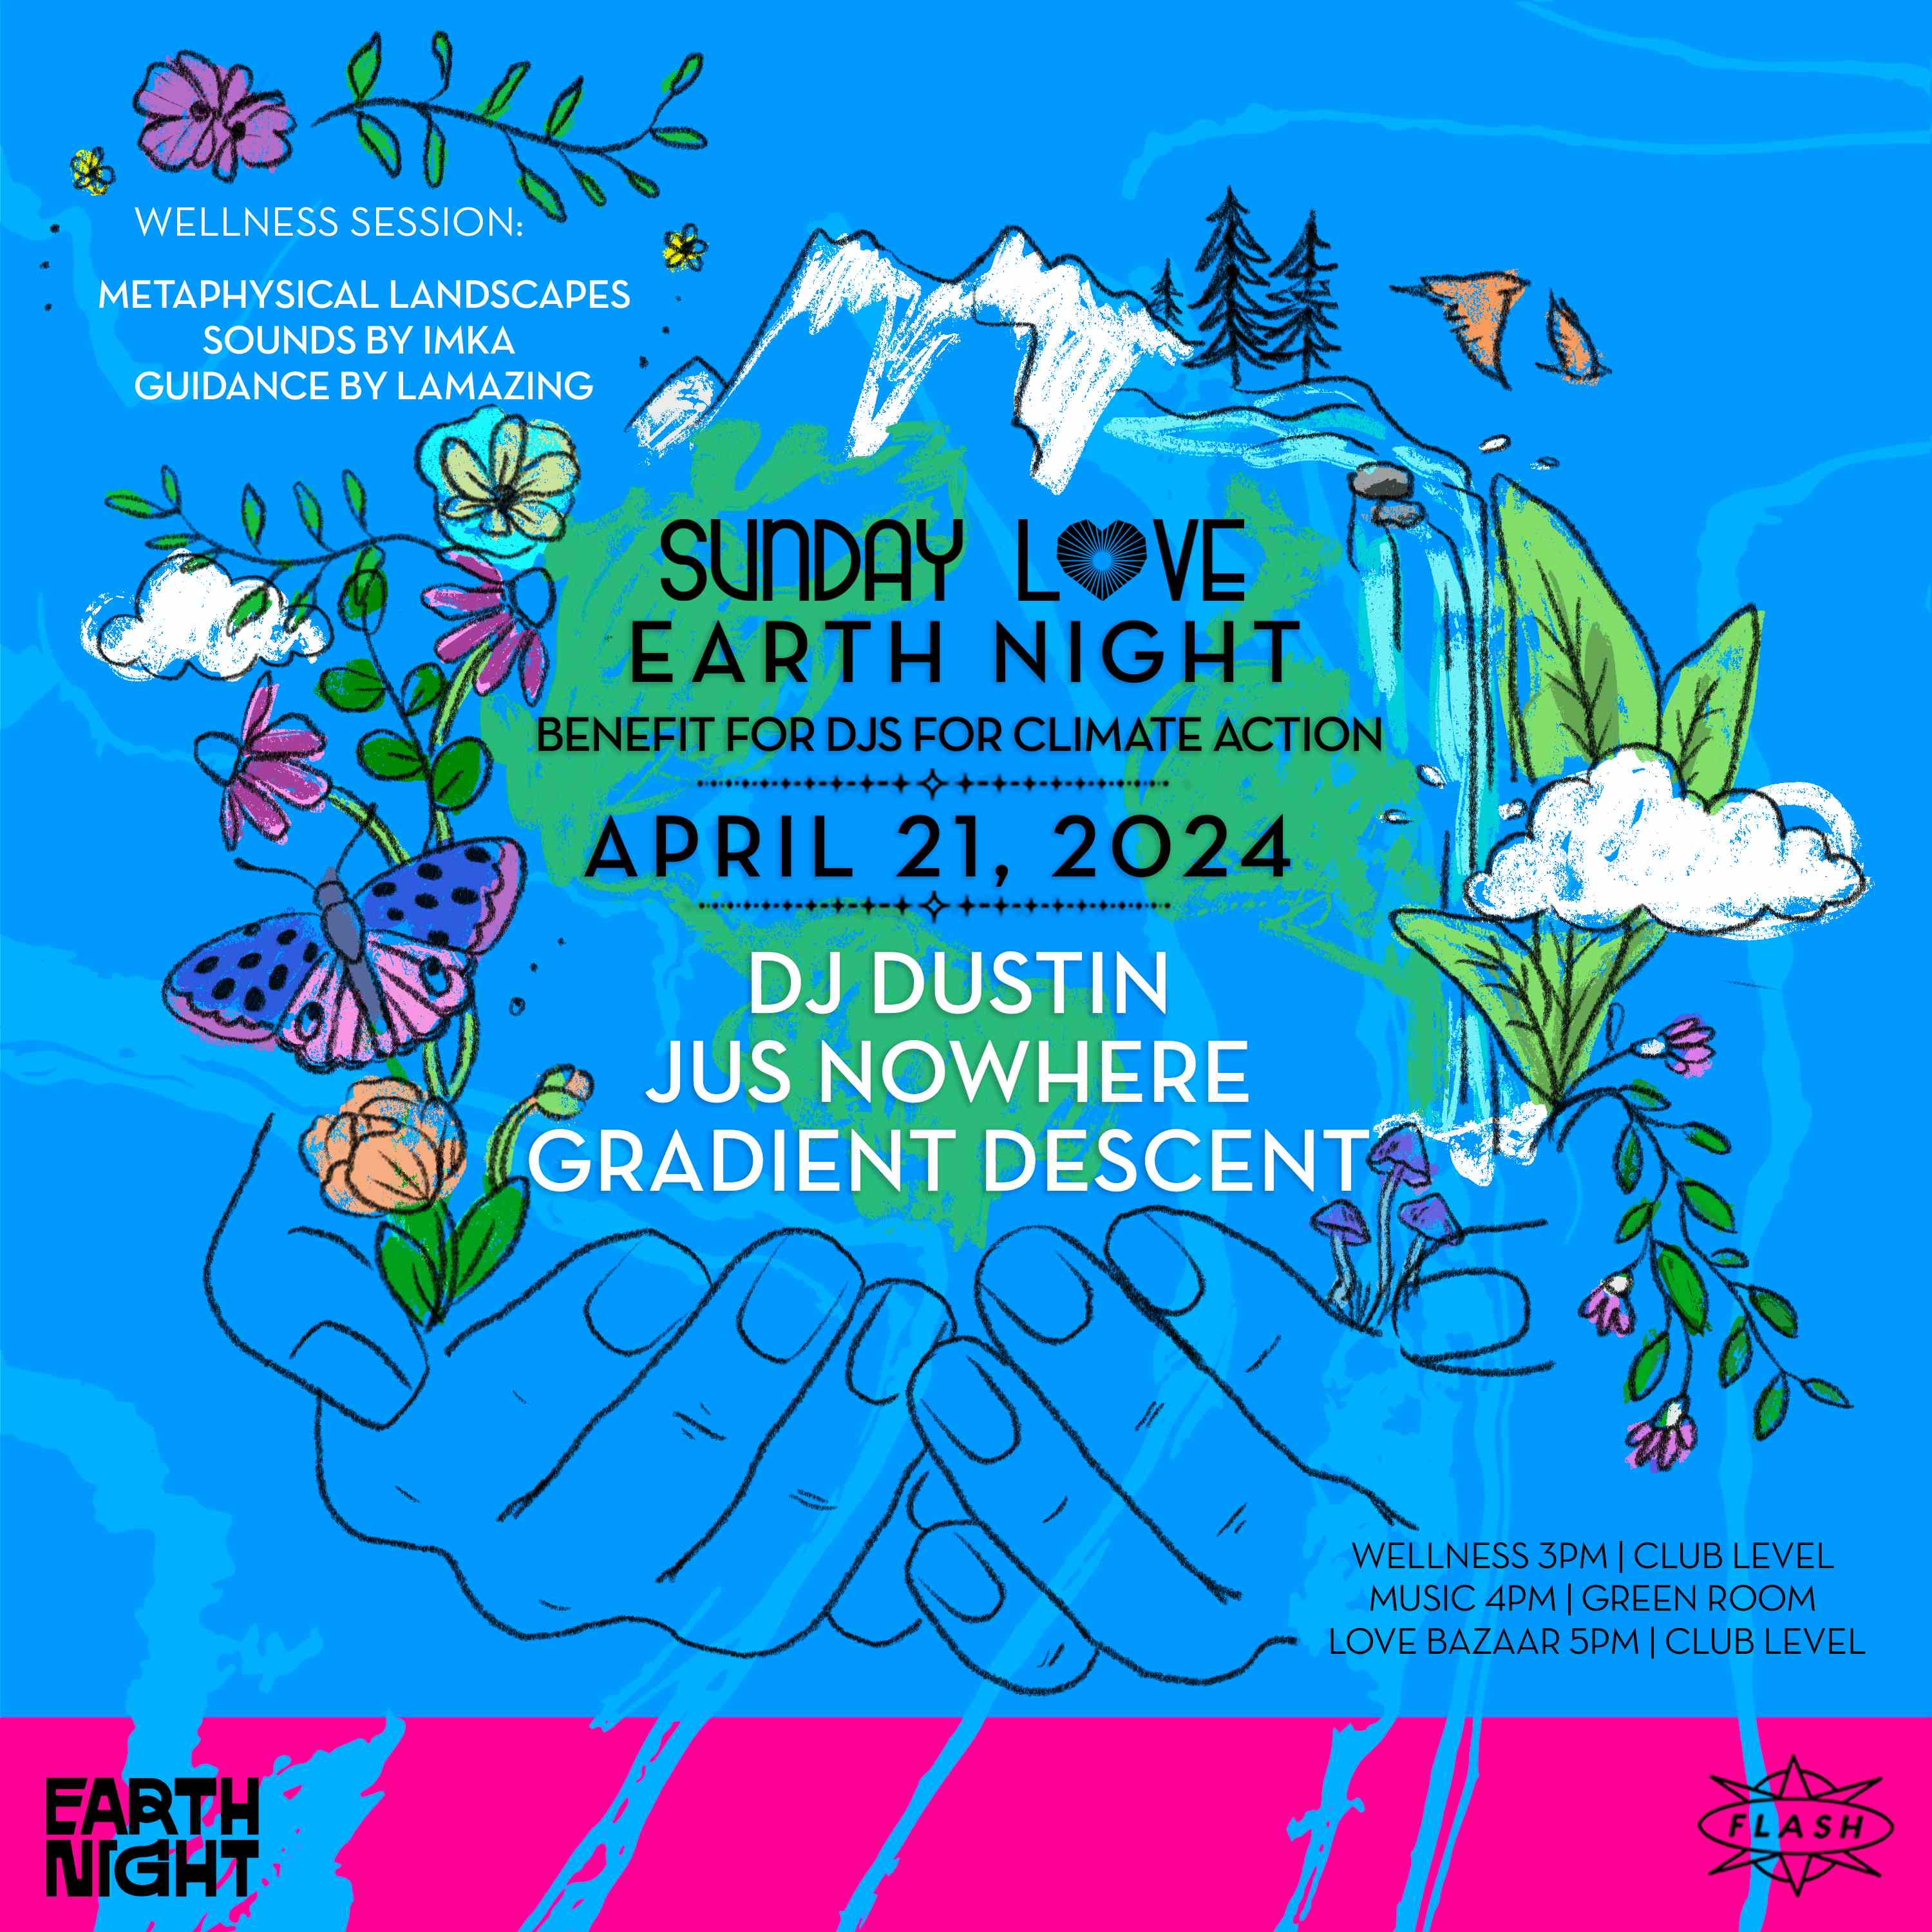 Sunday Love Earth Night: DJ Dustin (Giegling) event flyer